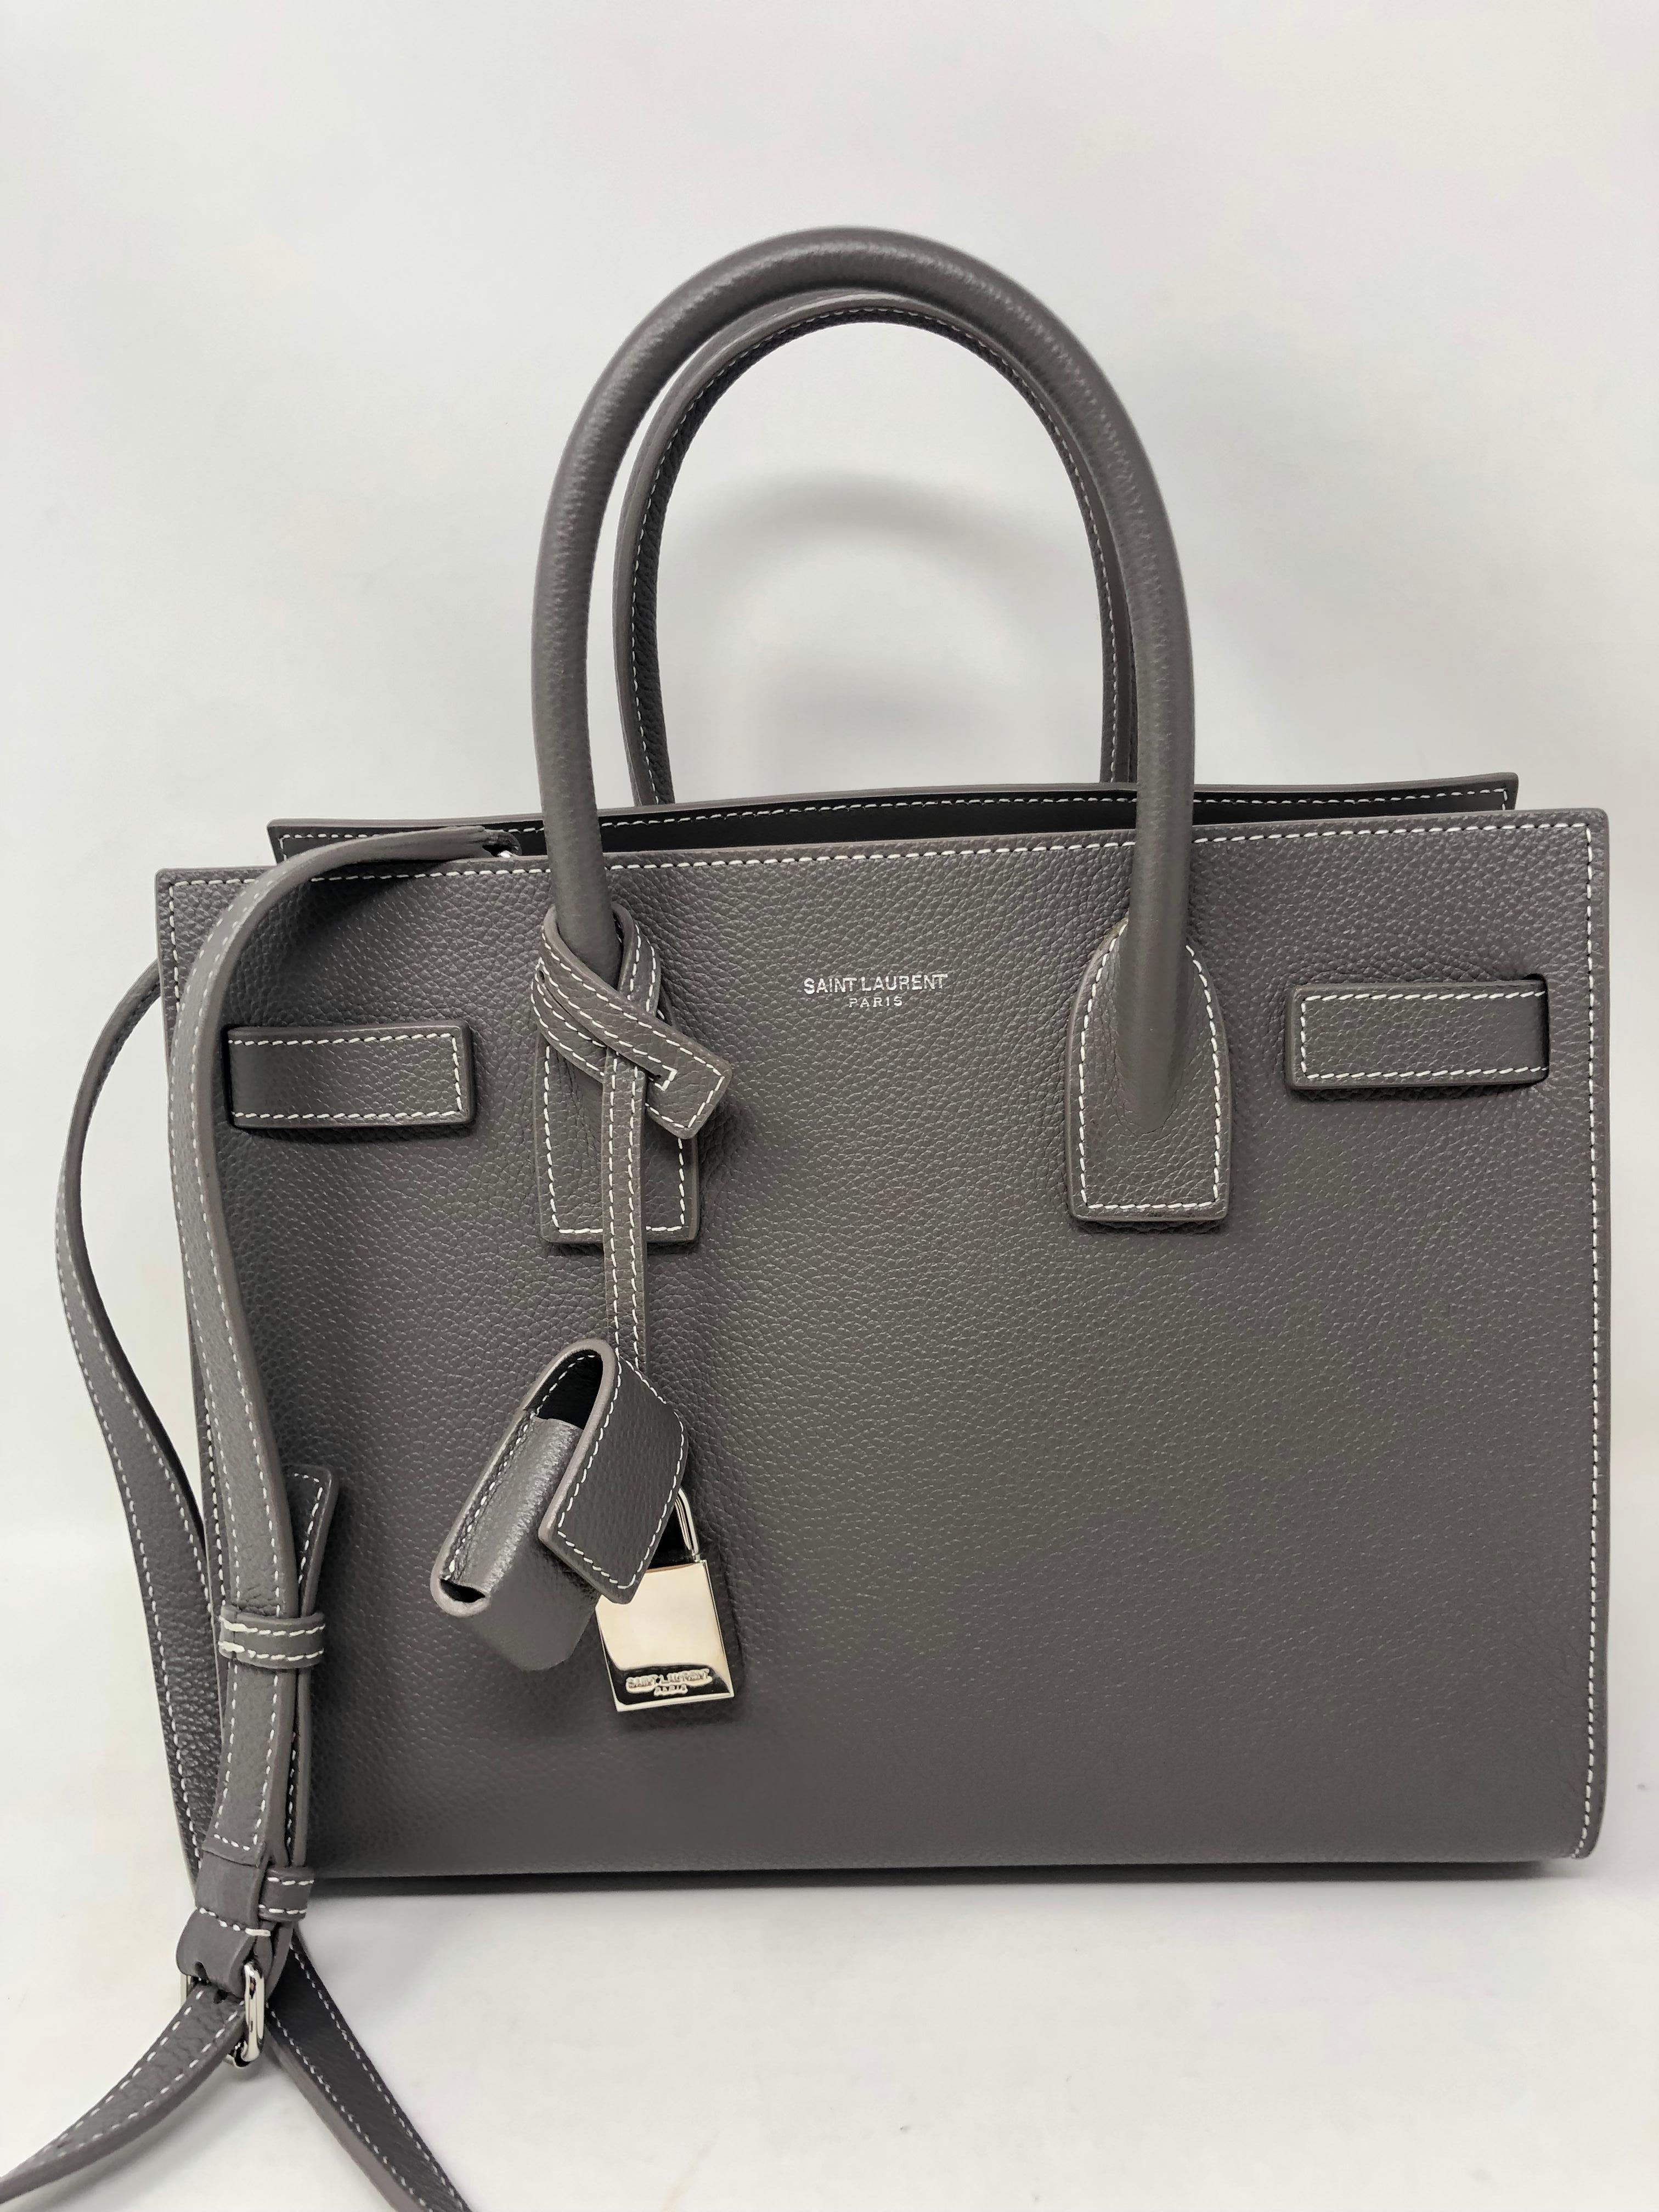 Saint Laurent Gray Baby Sac De Jour Bag. The mini size crossbody. New with tags, never used. Beautiful gray color in leather. Includes silver lock and key. Ready to be worn. Guaranteed authentic. 